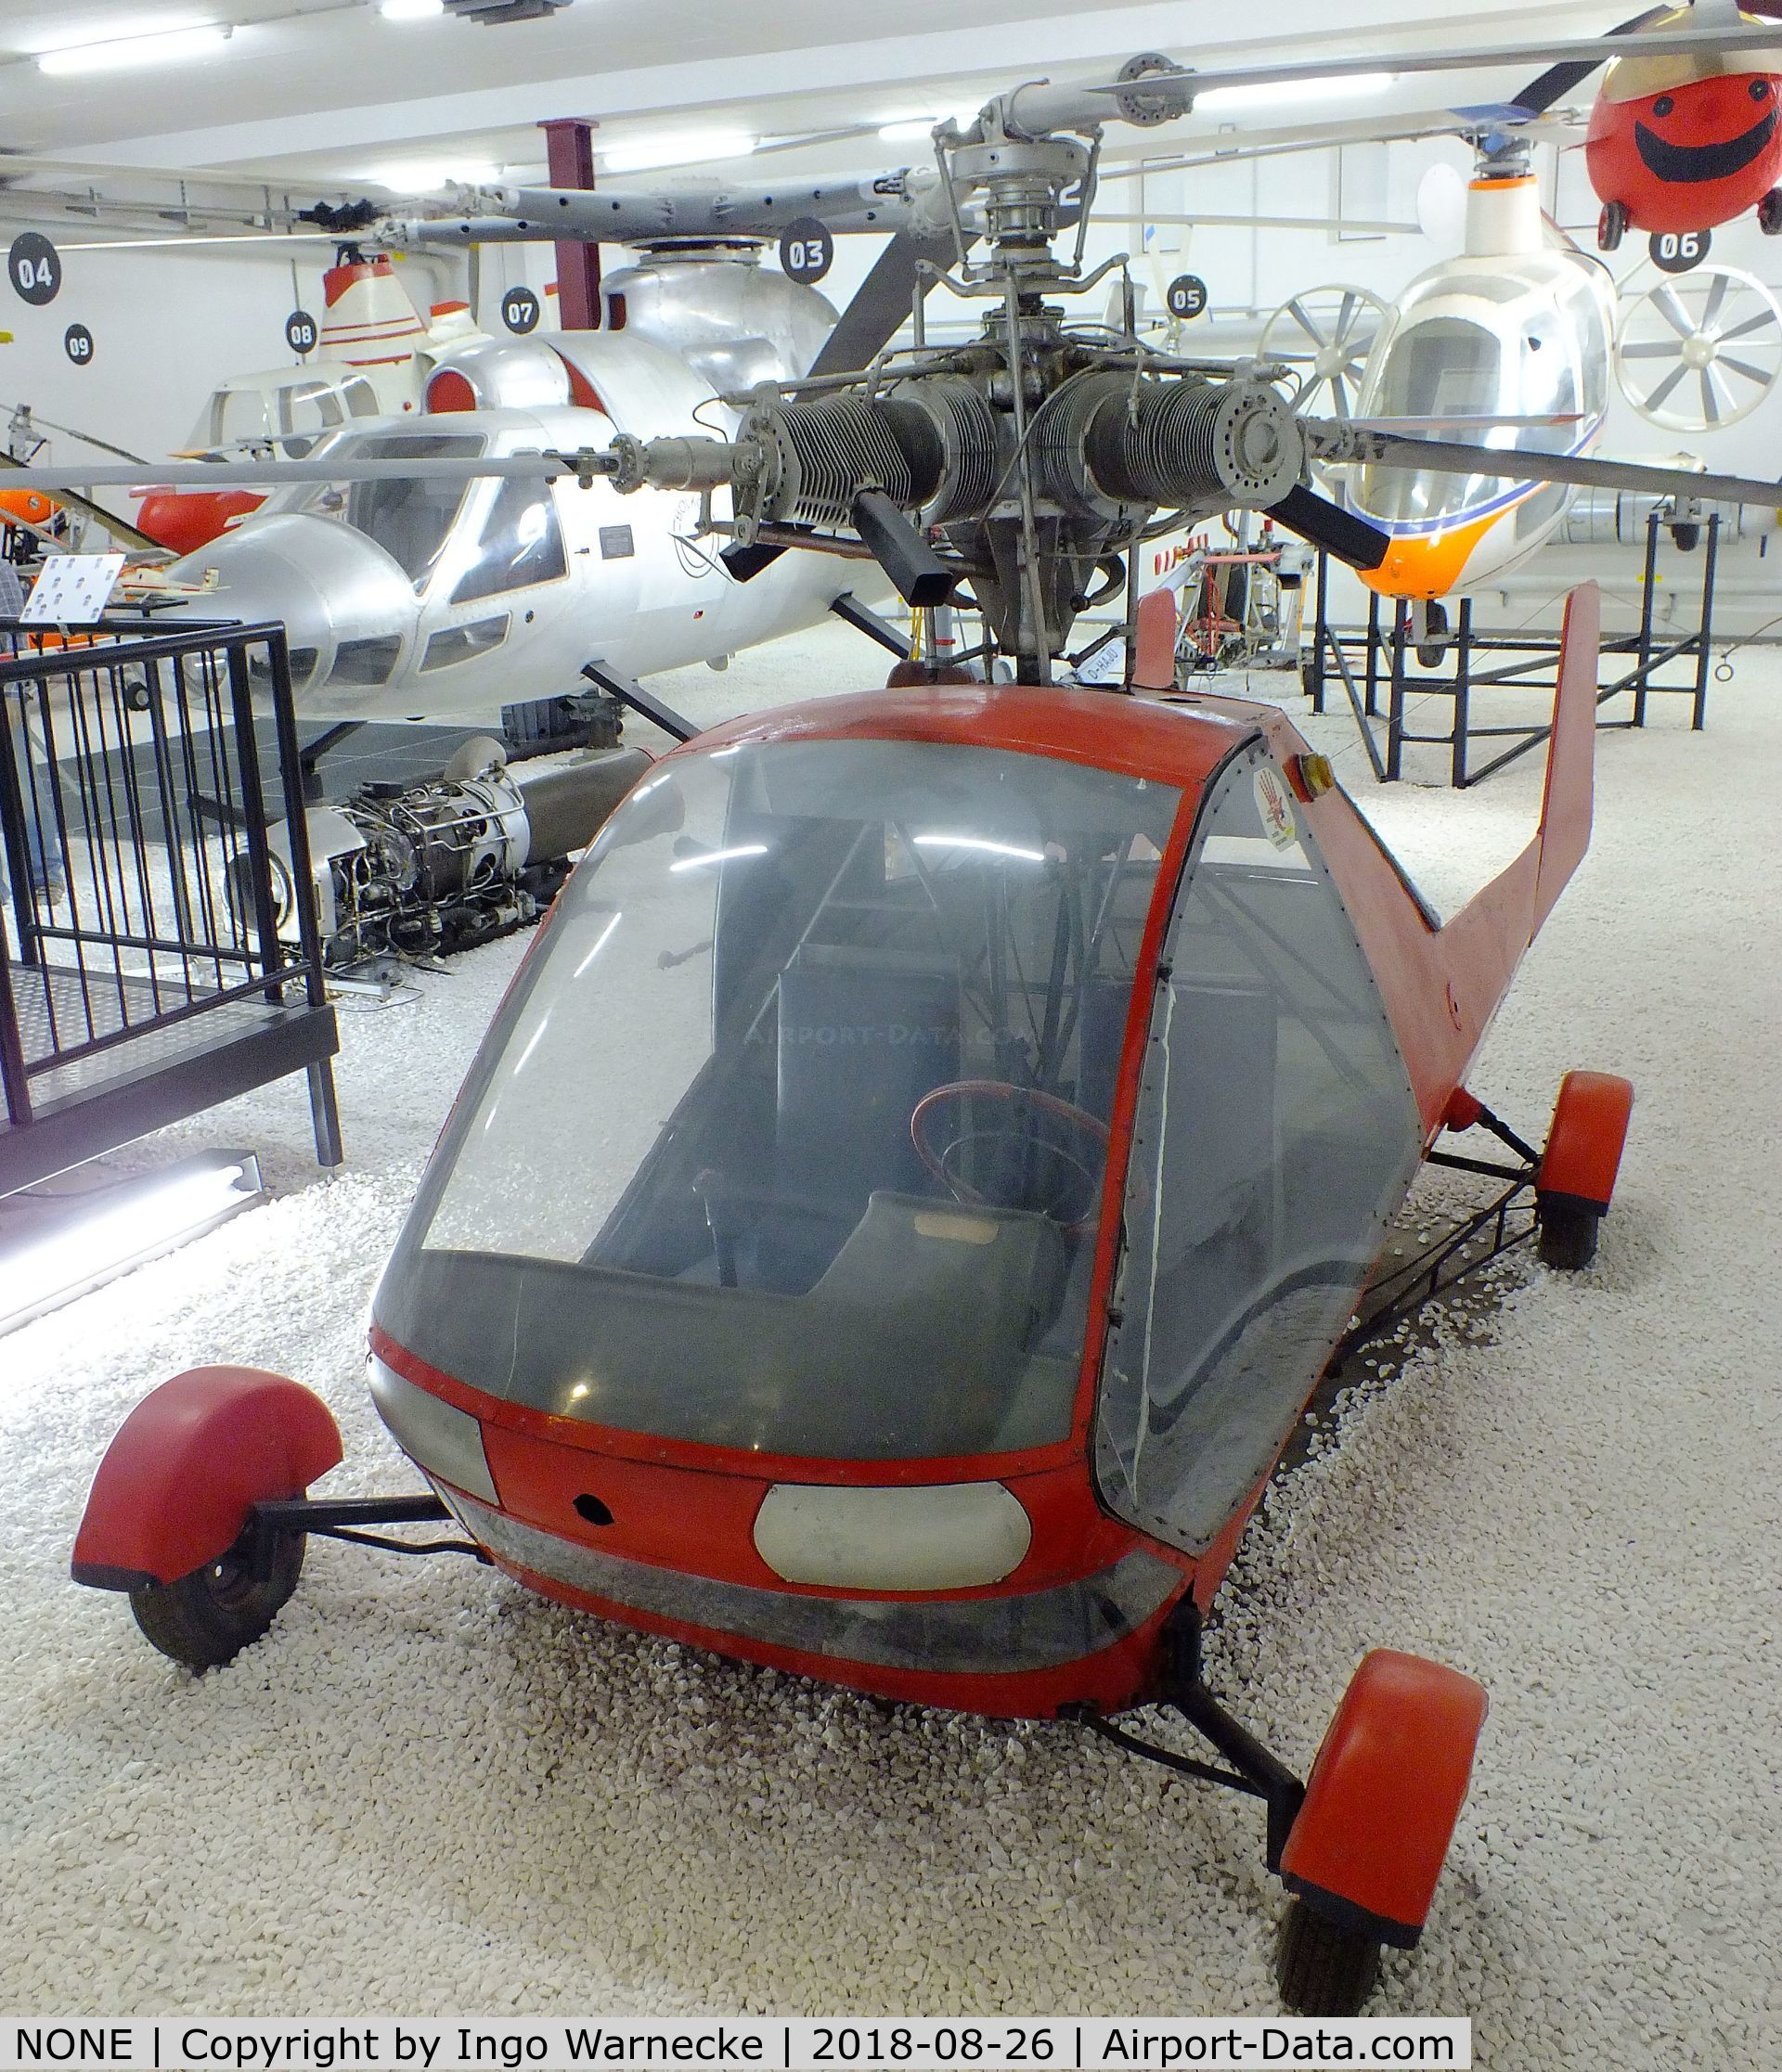 NONE, 1964 Wagner Rotocar 3 C/N 01, Wagner Rotocar 3 at the Hubschraubermuseum (helicopter museum), Bückeburg